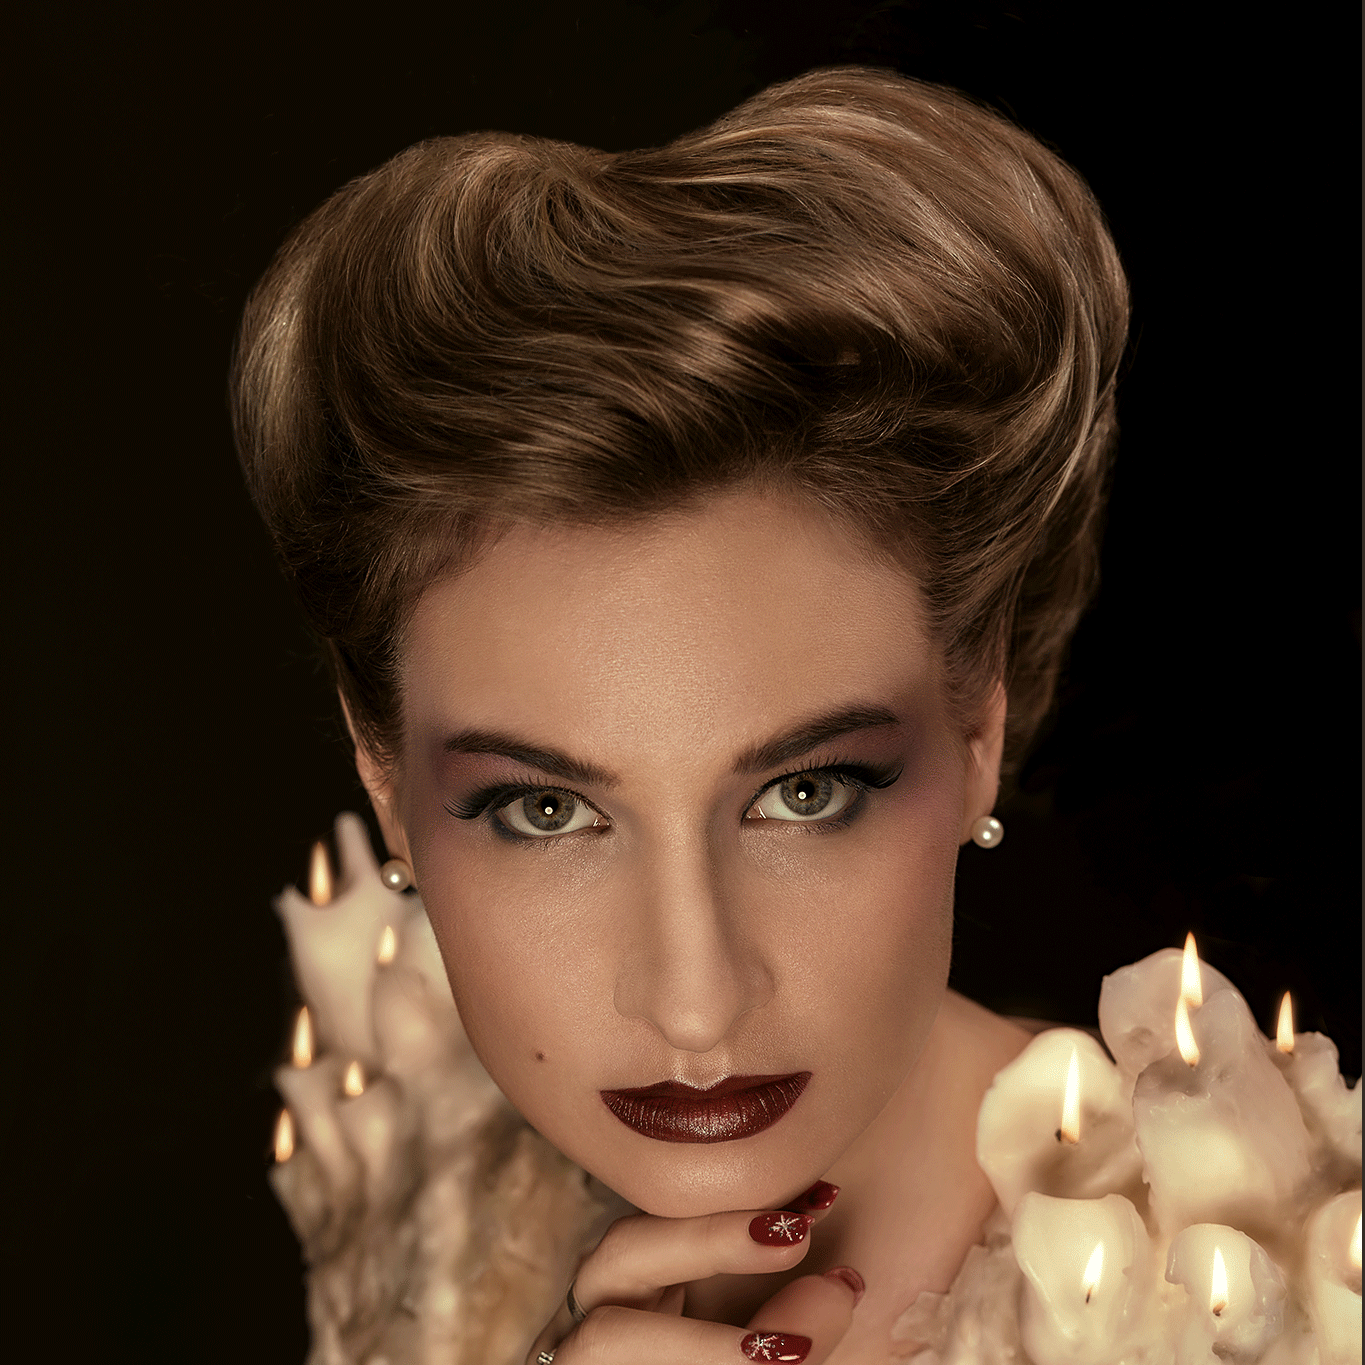 A modern reinterpretation of the Gibson Girl hairstyle, featuring the model Anna Povarova with burning wax candles arranged as shoulder pads.